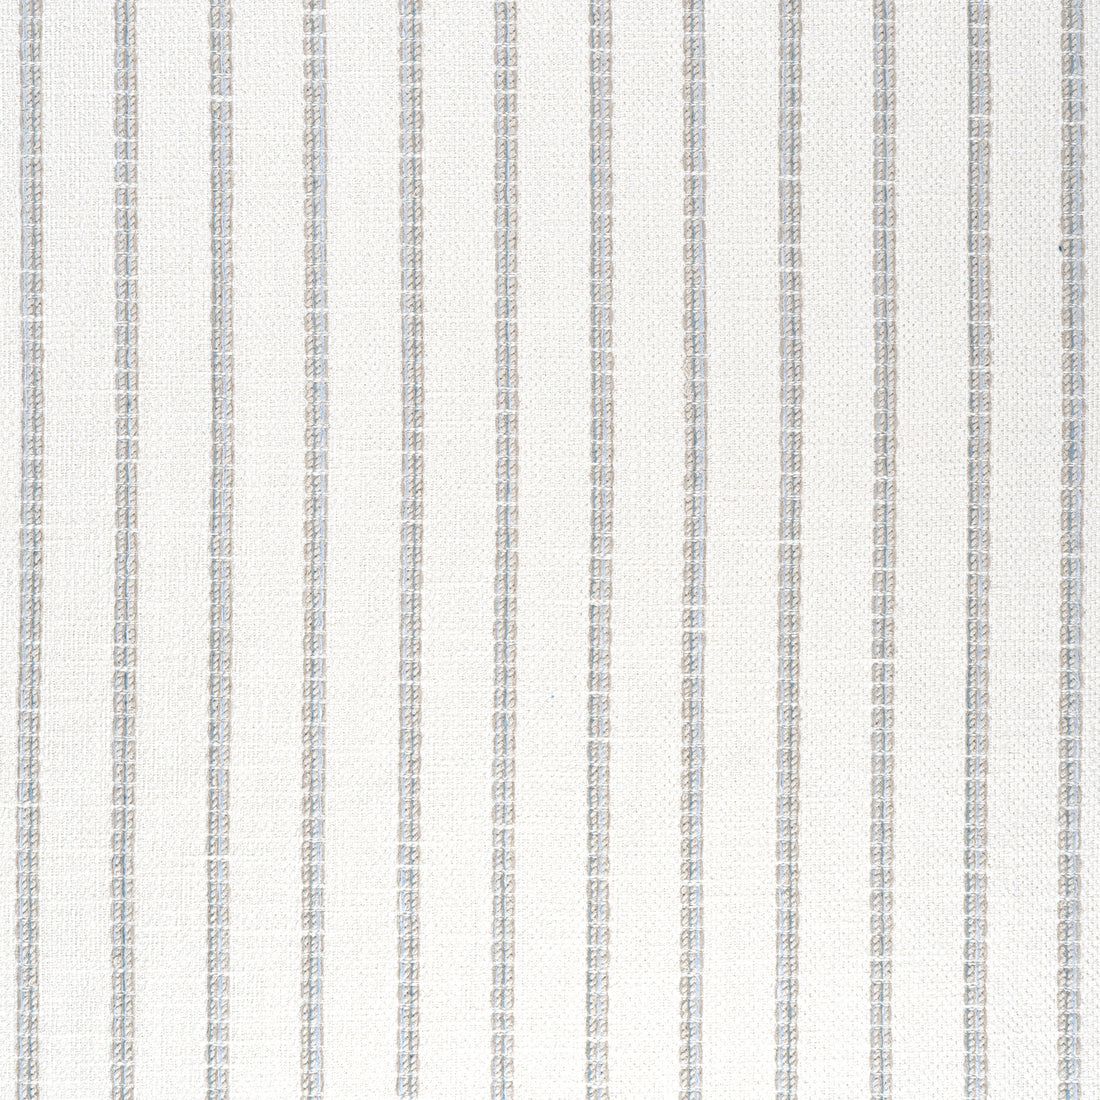 Oak Creek Stripe fabric in glacier color - pattern number W78339 - by Thibaut in the  Sierra collection